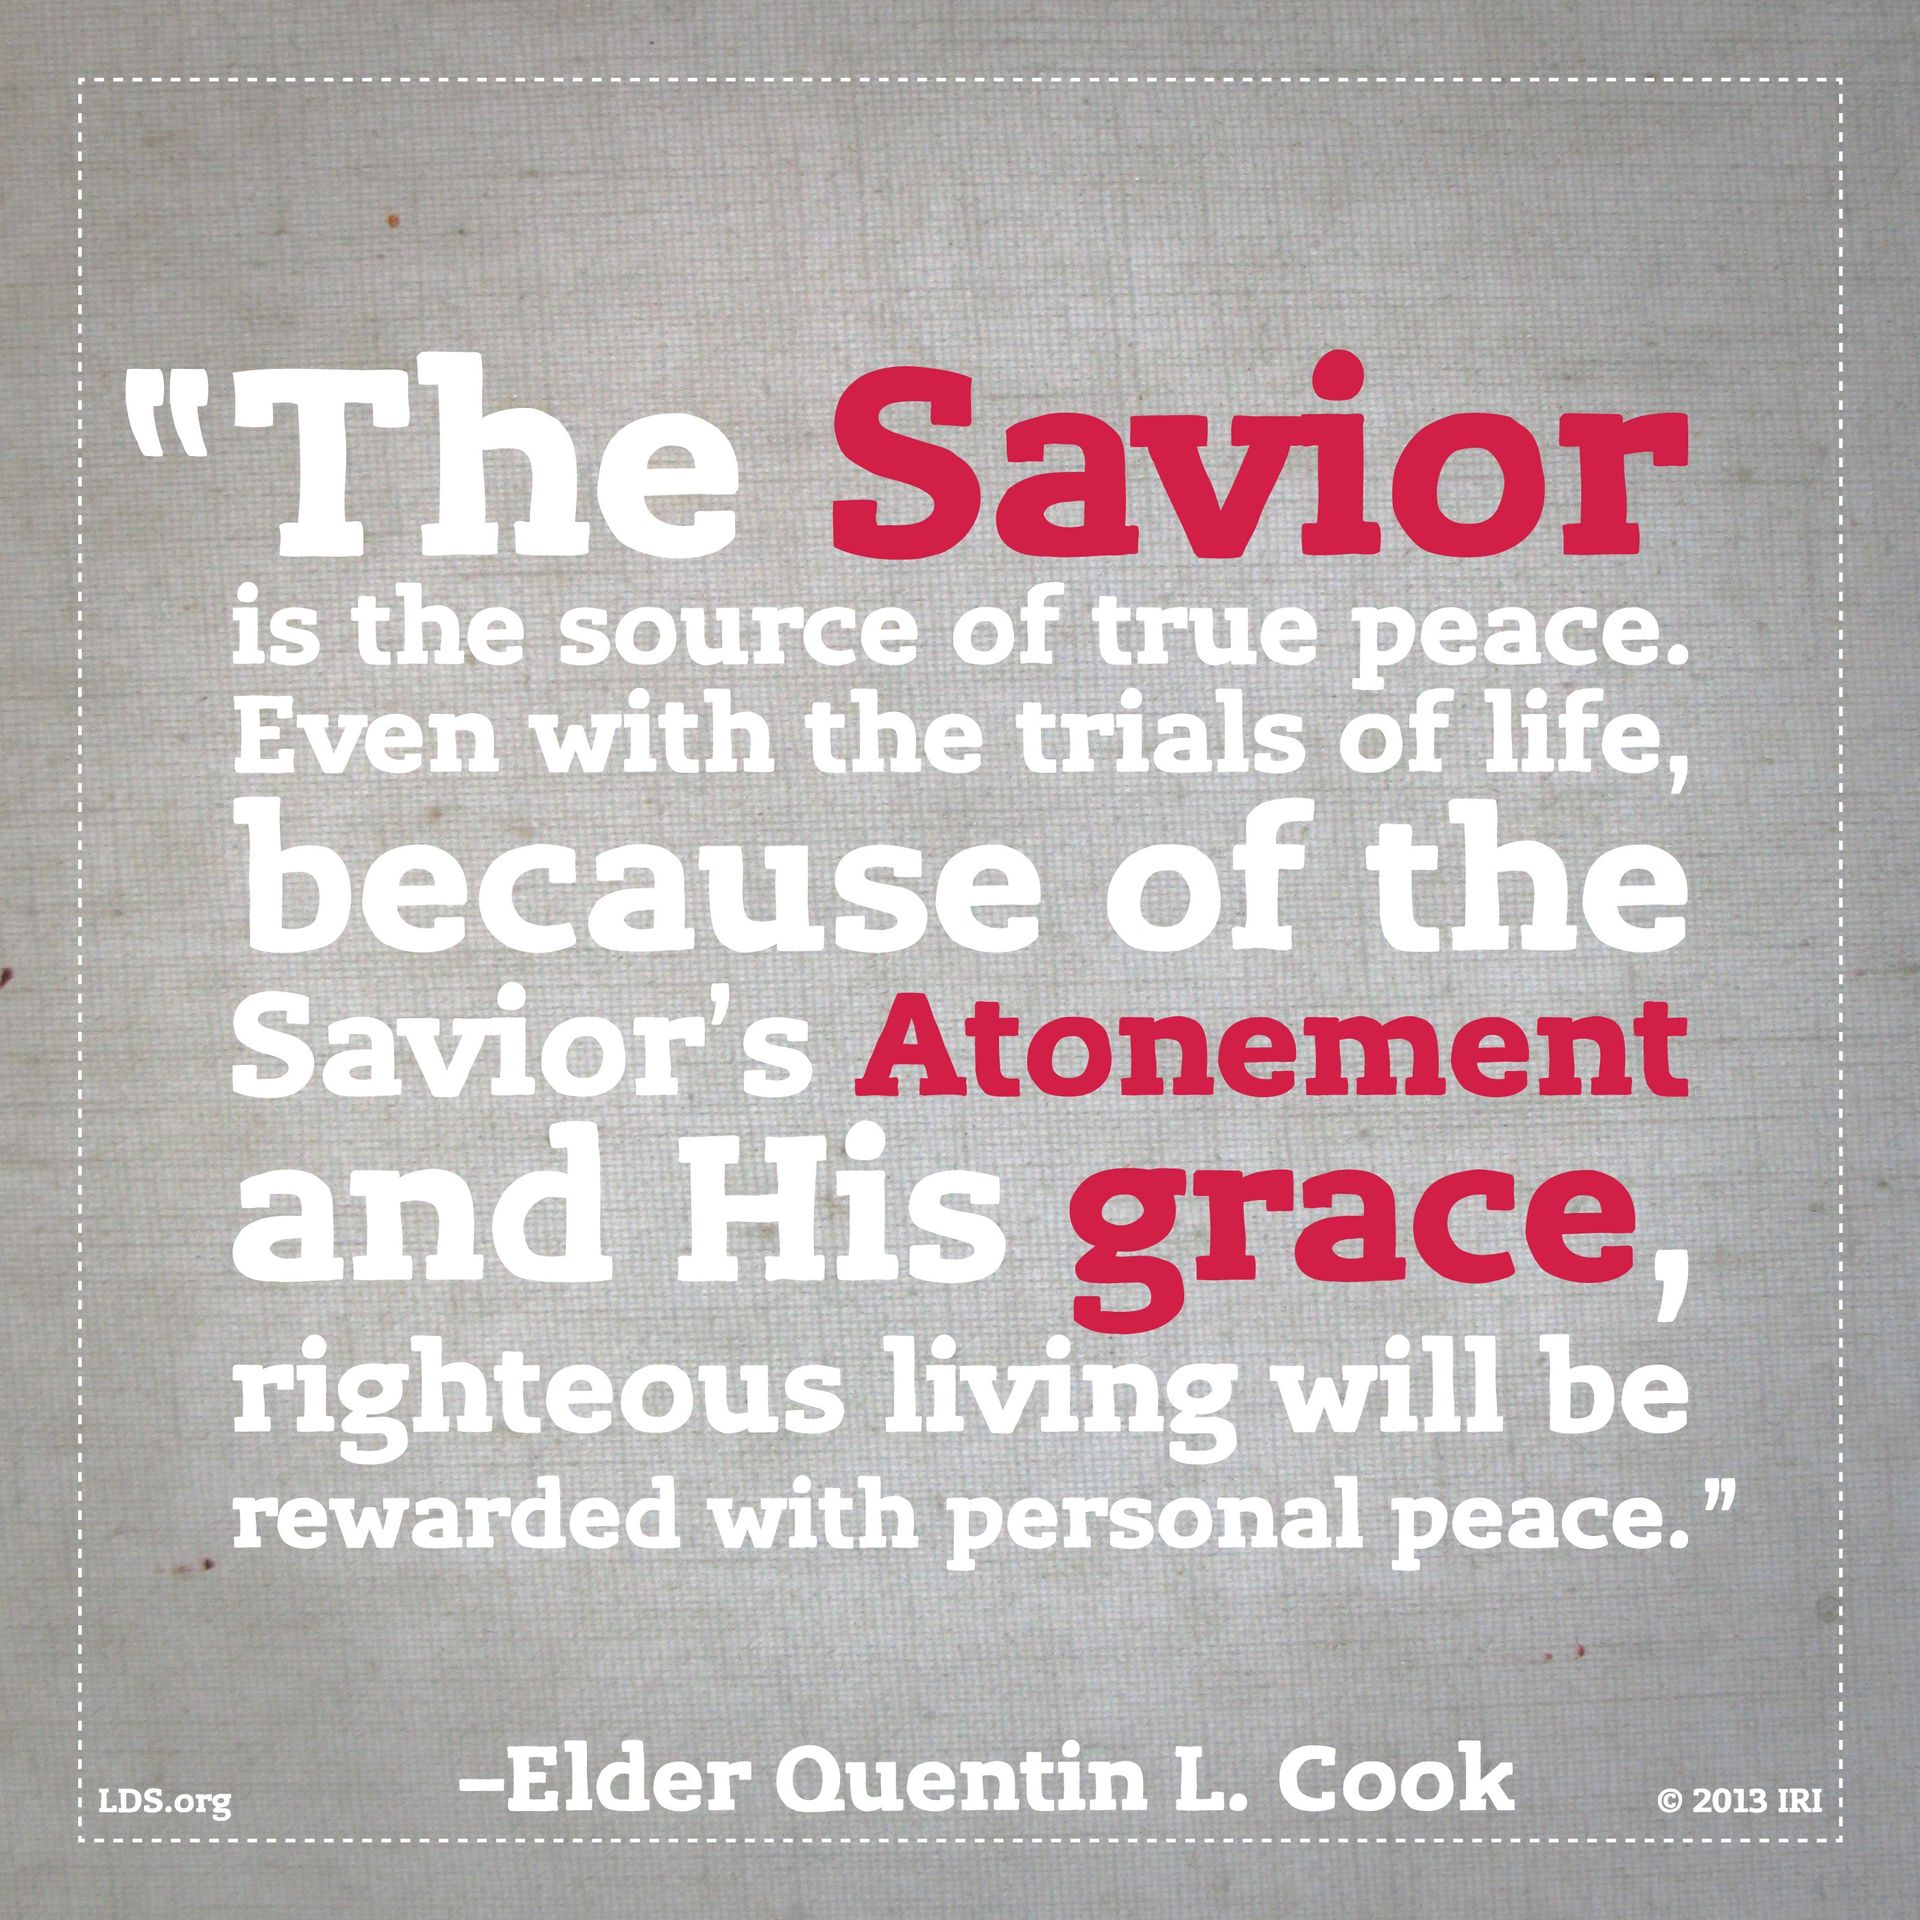 “The Savior is the source of true peace. Even with the trials of life, because of the Savior’s Atonement and His grace, righteous living will be rewarded with personal peace.”—Elder Quentin L. Cook, “Personal Peace: The Reward of Righteousness”